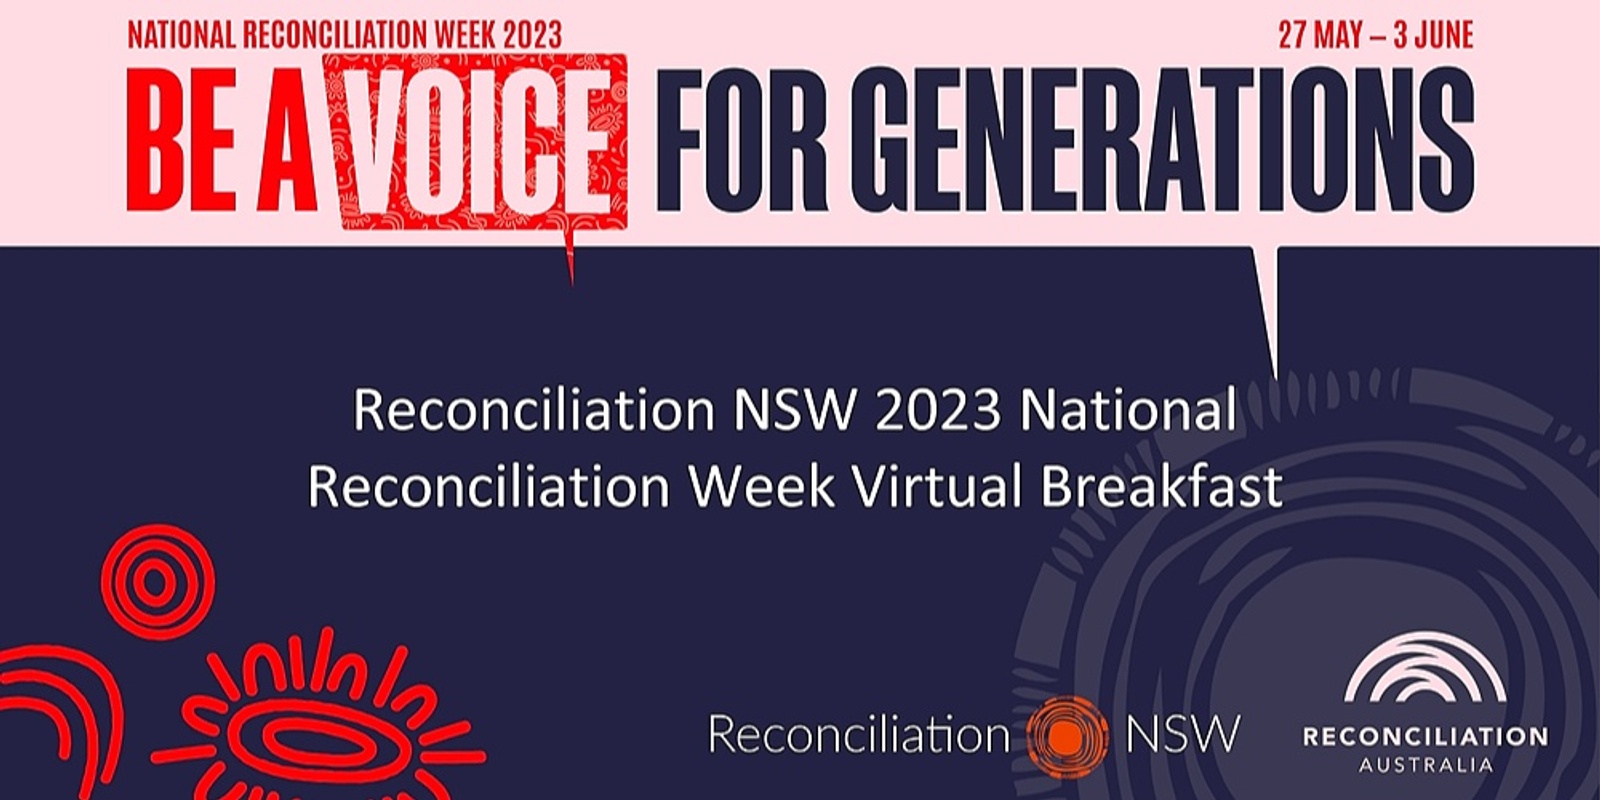 Reconciliation NSW's 2023 National Reconciliation Week Virtual Breakfast (Non-Member Organisation Rate)